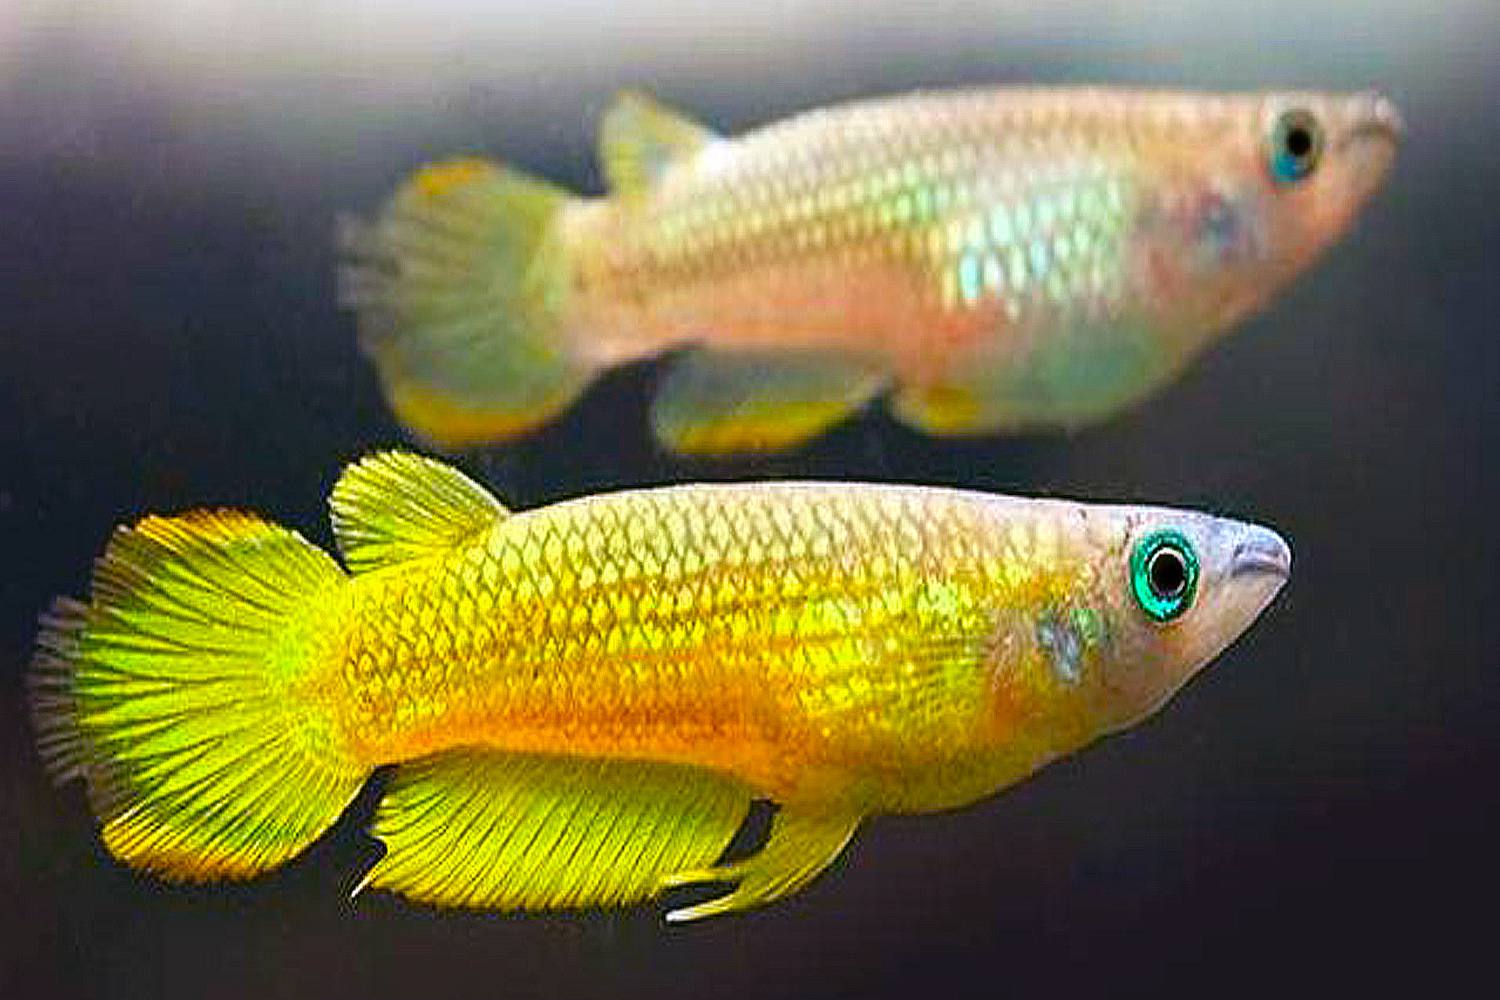 Two yellow Limeatus (Aplocheius lineatus) in water.